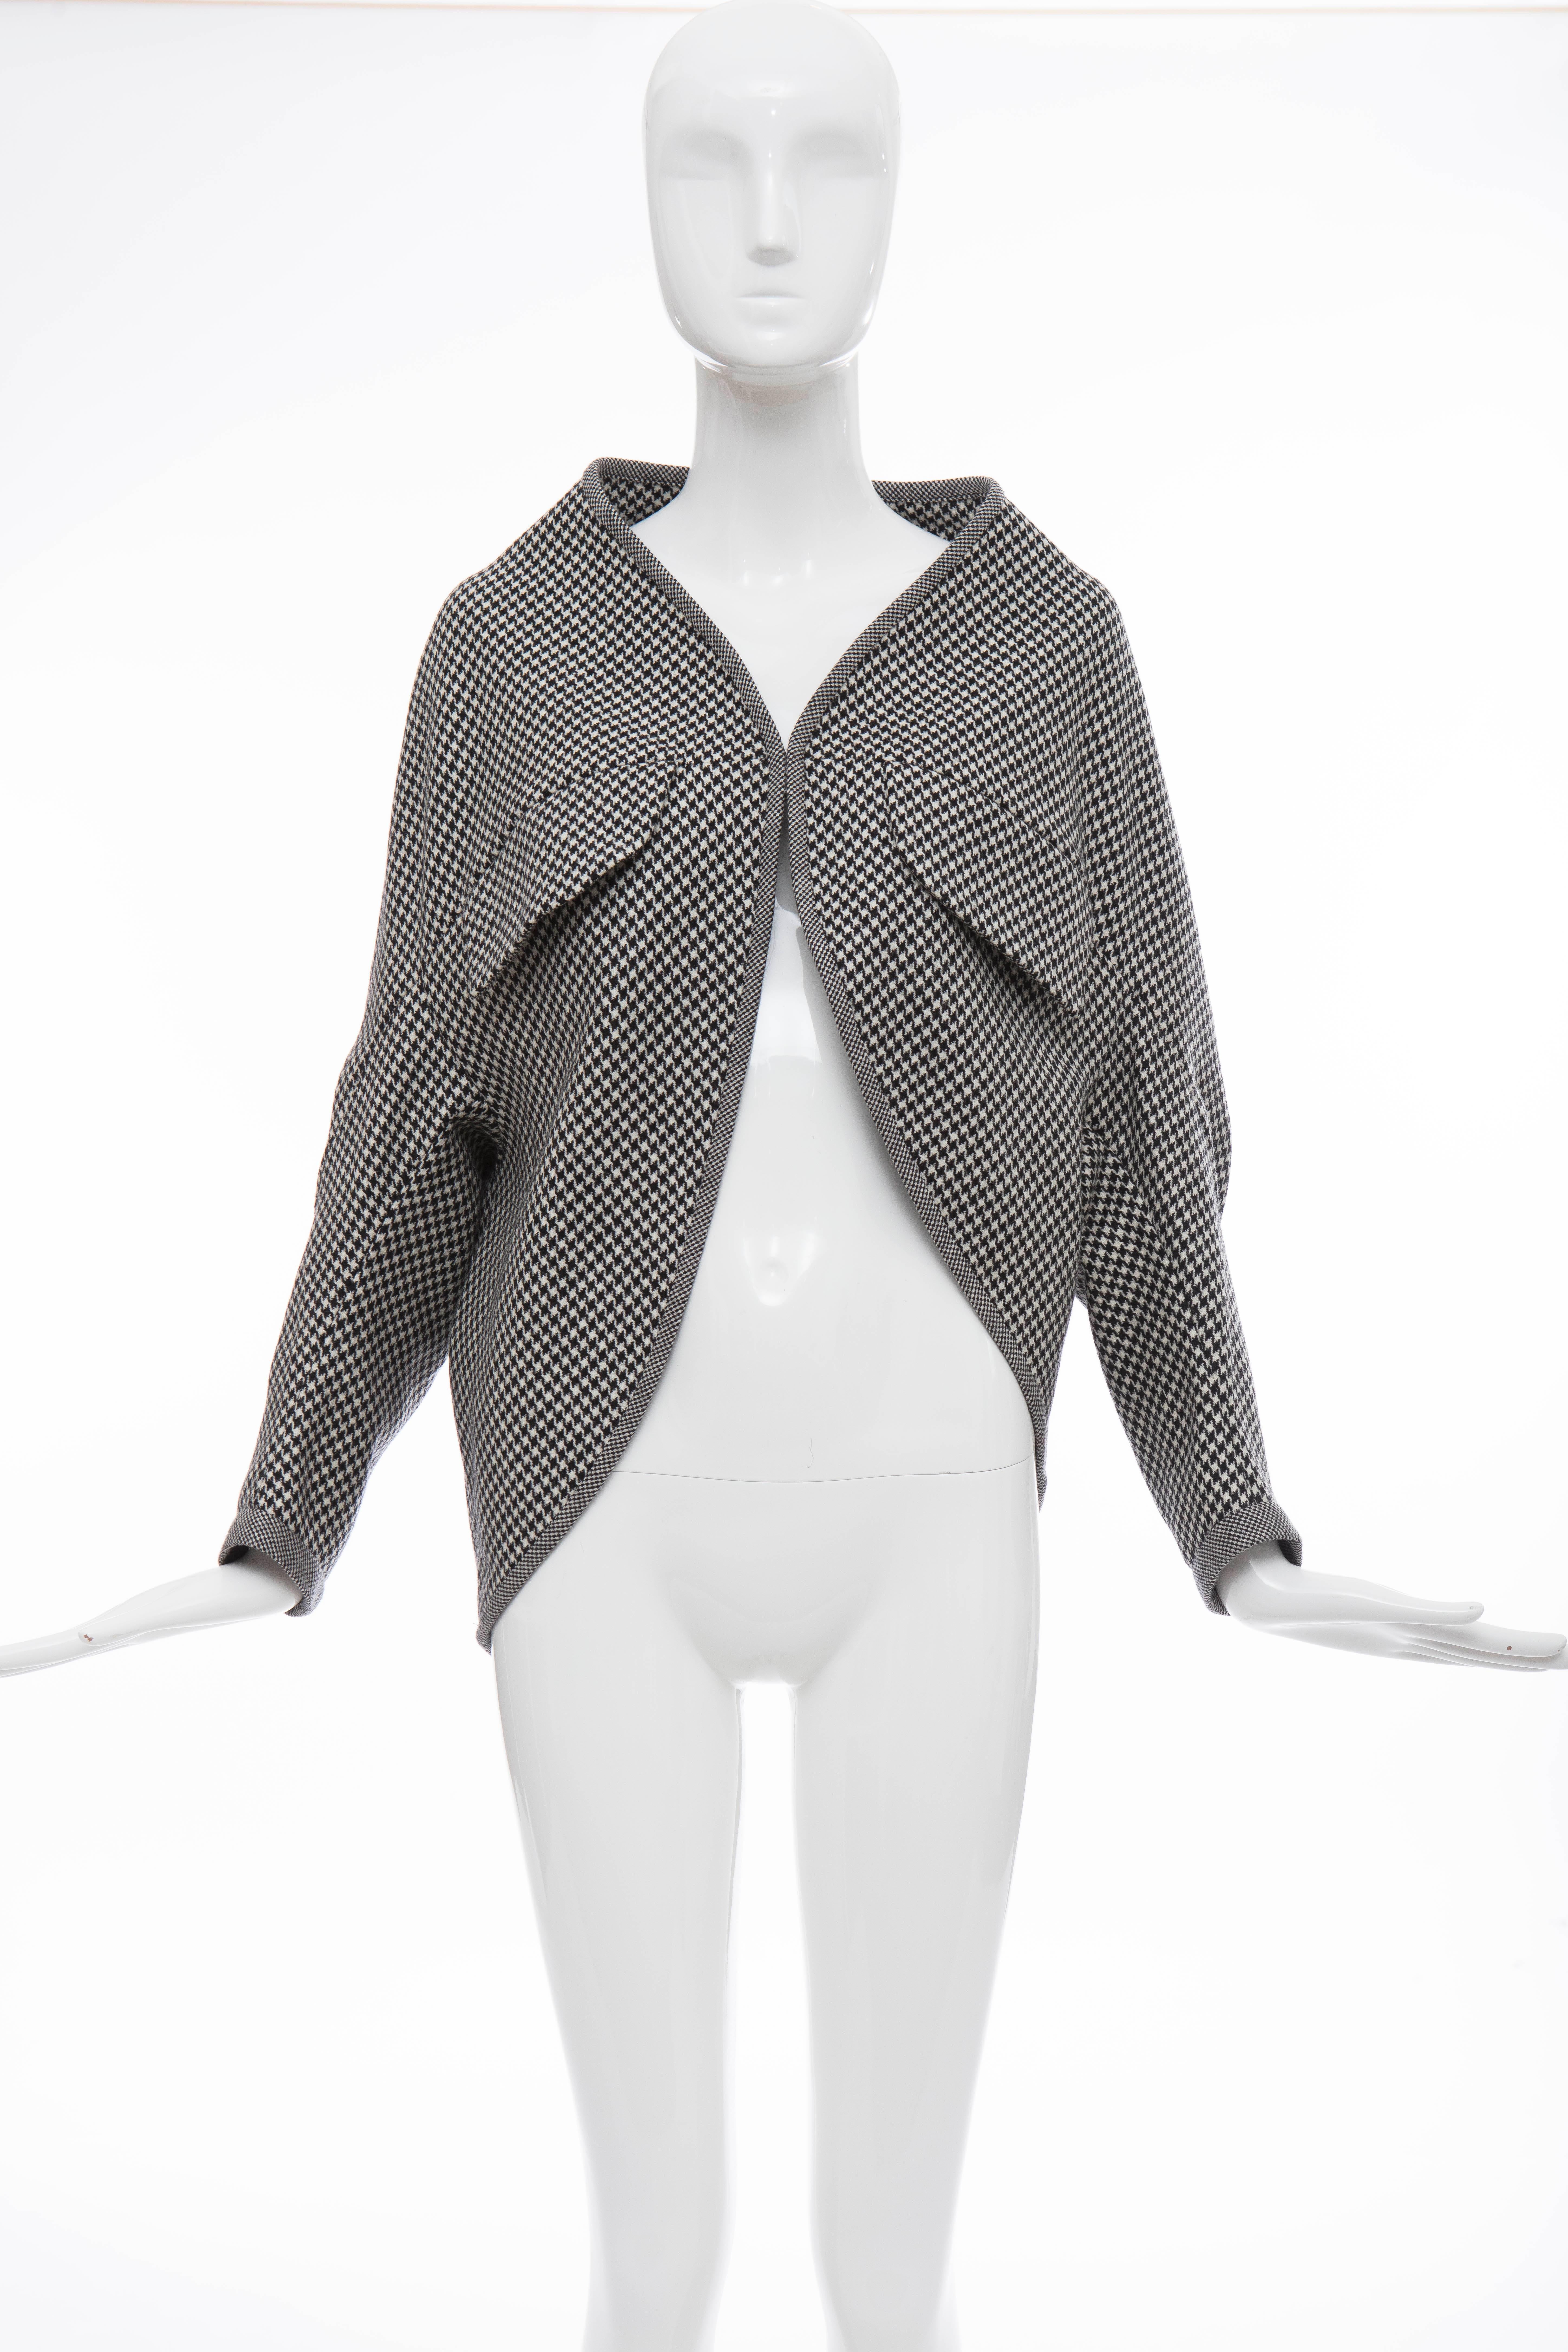 Yohji Yamanoto, Autumn-Winter 2003 wool jacket with houndstooth pattern throughout, shawl collar, dual flap pocket at bust and hook-and-eye closure at front. 

Japan: 2
US. Medium

Bust: 53, Waist 51, Shoulder 18.5, Length 25, Sleeve 8
